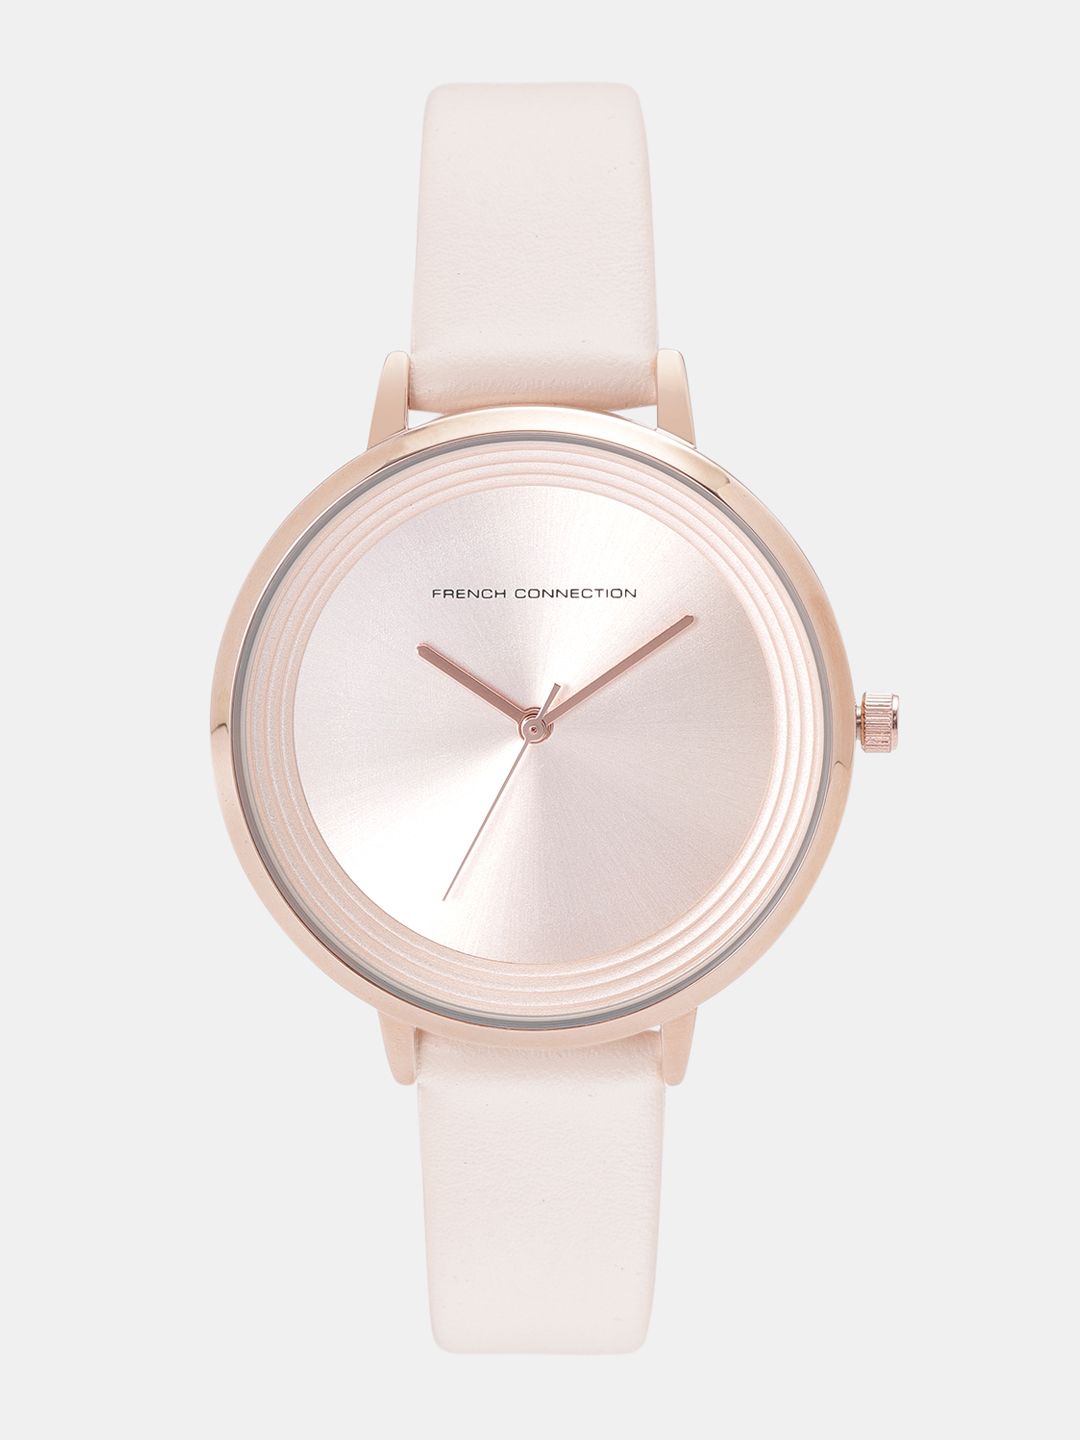 French Connection Women Rose Gold-Toned Analogue Watch FCN0001A Price in India